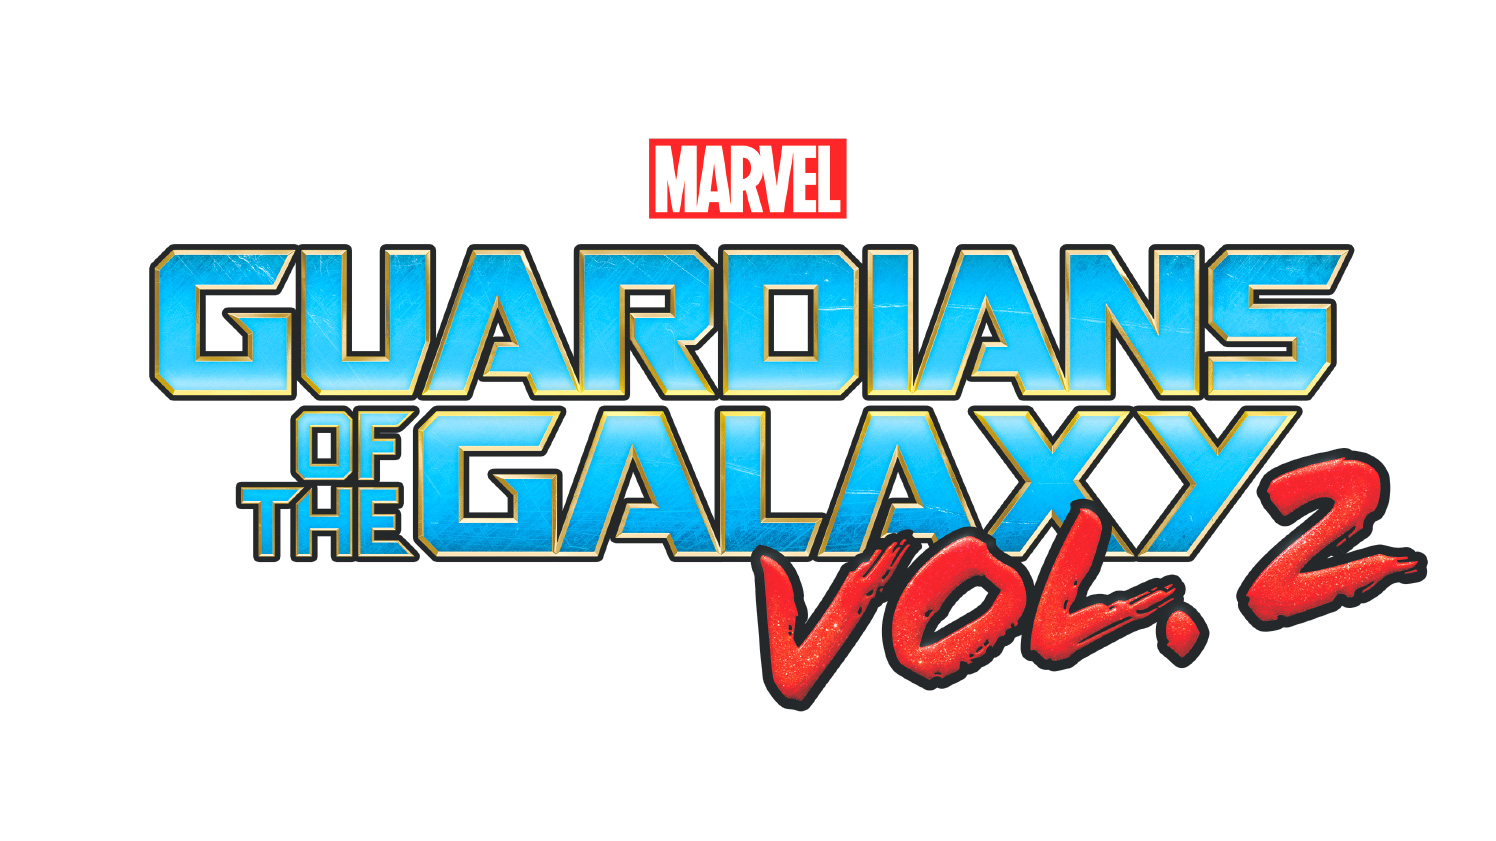 Marvel Unveils Out of This World Merchandising Program for Guardians of the Galaxy Franchise